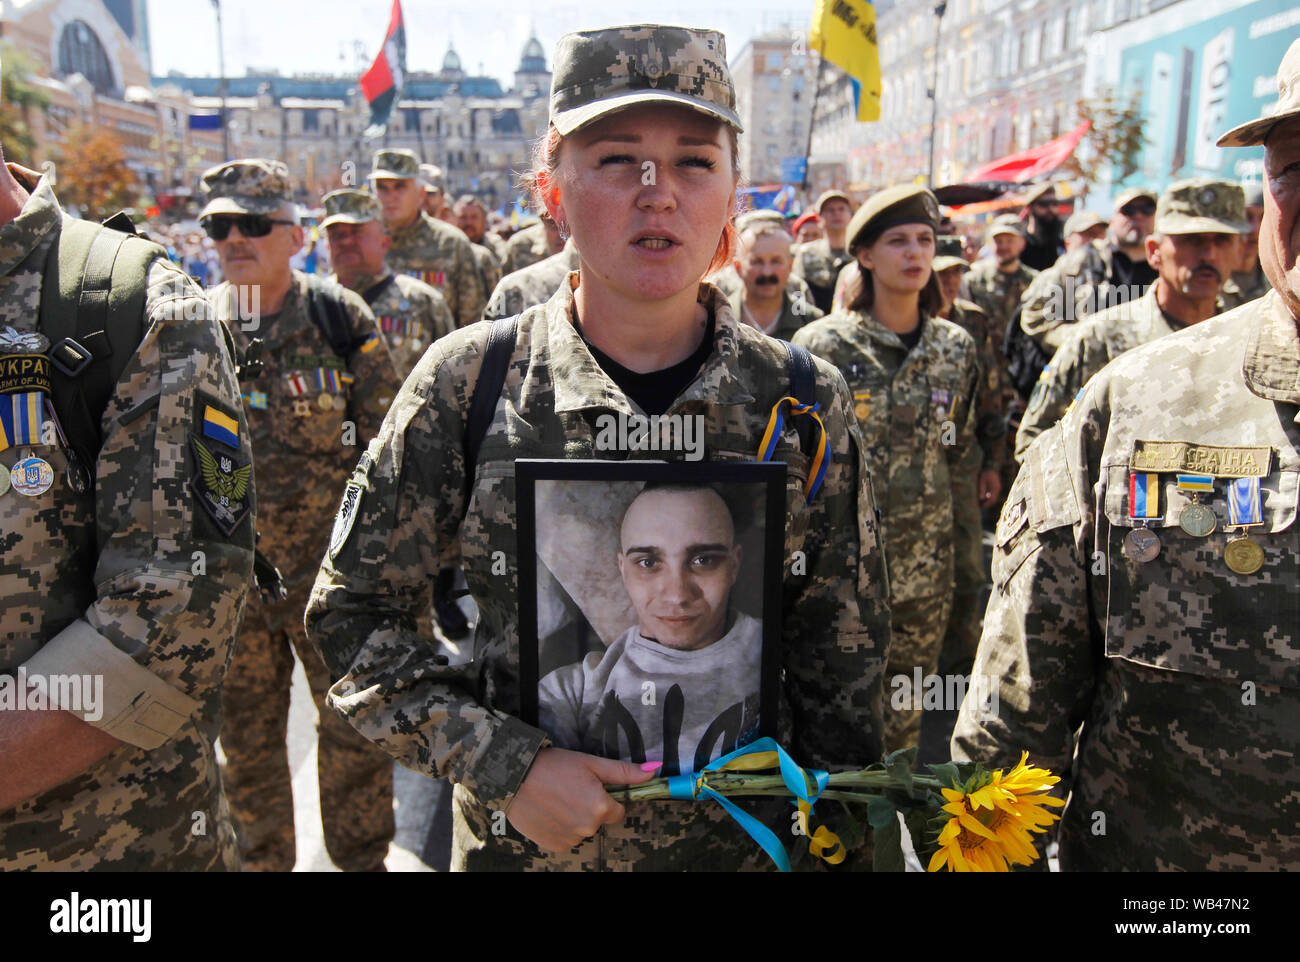 A Ukrainian servicewoman holds a veteran's portrait at the Independence Square during the Anniversary.Ukraine marks the 28th Independence Day Anniversary from the Soviet Union since 1991 on August 24, 2019. Stock Photo